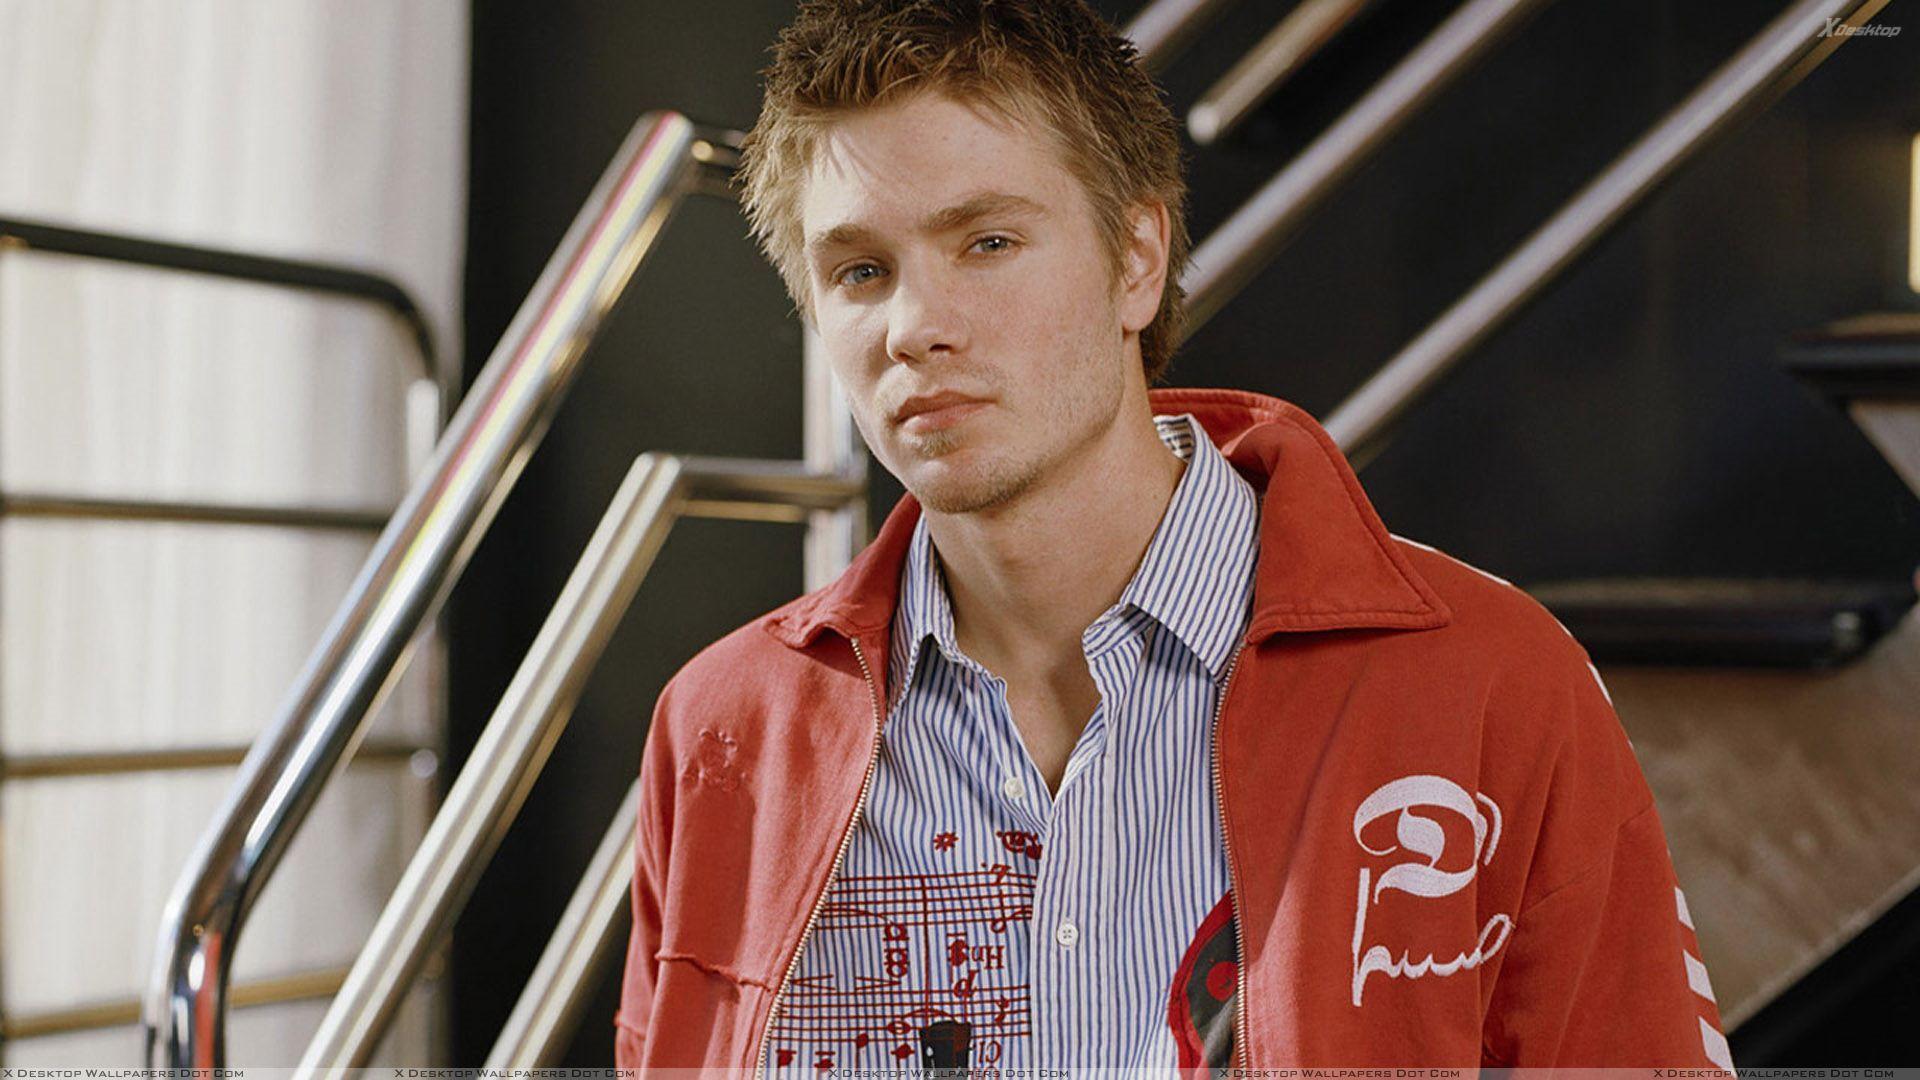 Chad Michael Murray Looking Front In Red Jacket Wallpaper